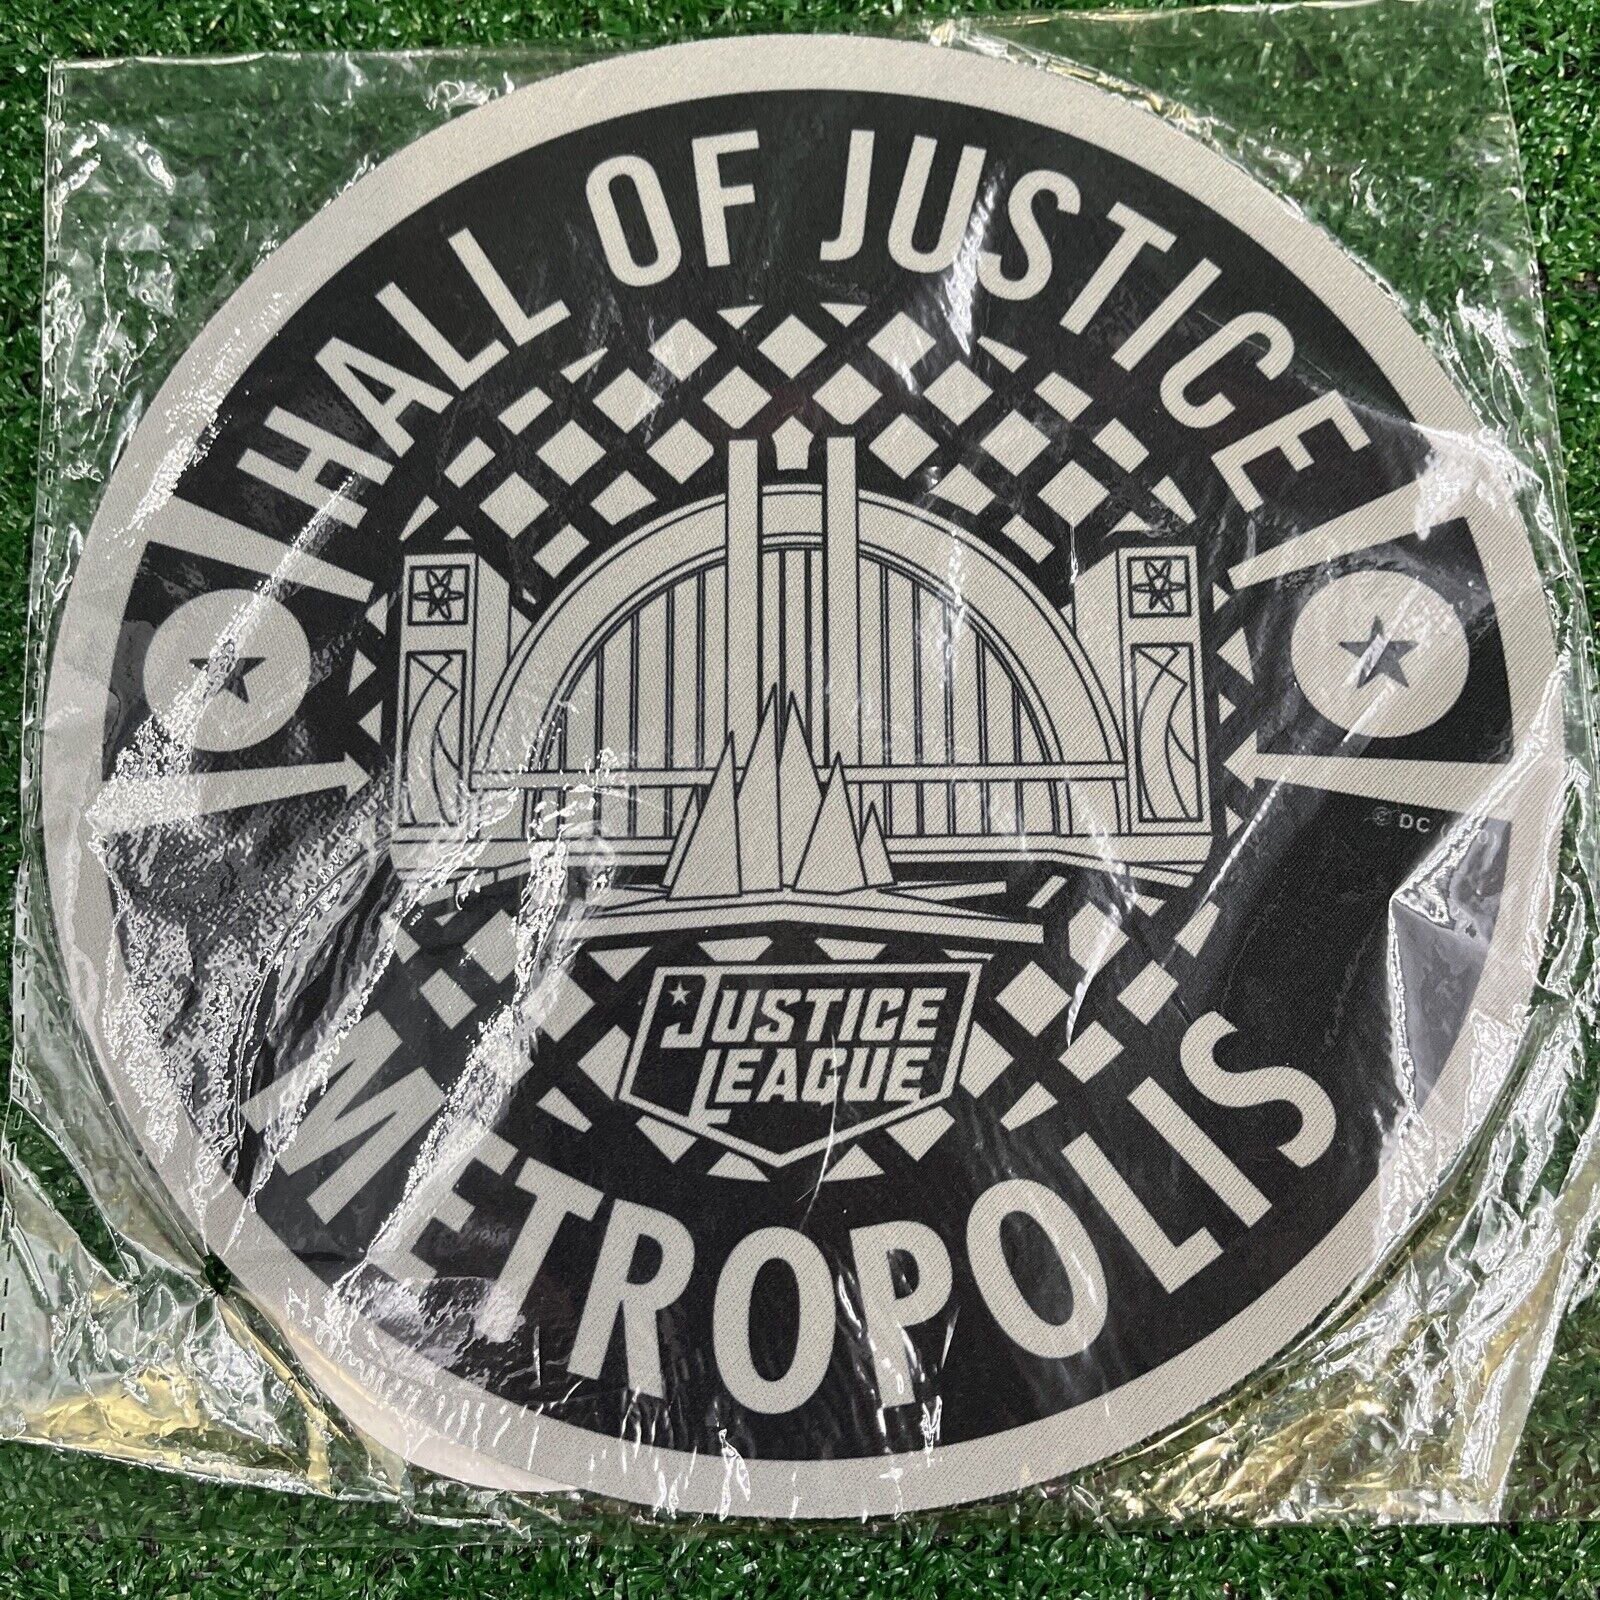 DC Justice League Hall of Justice Metropolis 8 inch Round Mouse Pad New